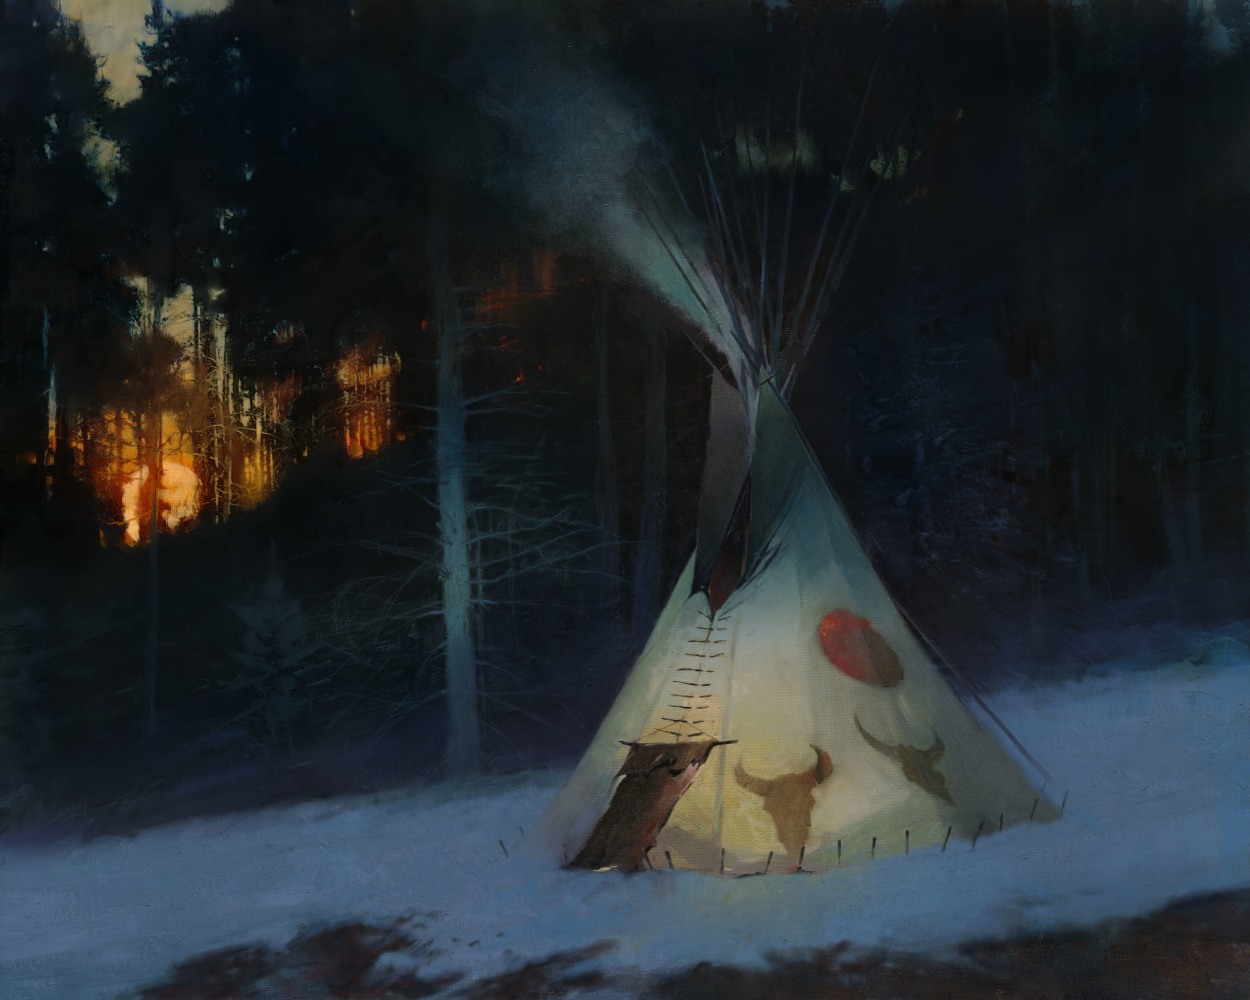 Bad Moon on the Rise
Oil on canvas
24 x 30 inches

&amp;ldquo;The last warmth of a weak winter sun passes over a lone tipi in the shadows. The lodge&amp;rsquo;s design suggests the nature of the starving time: long, cold nights and little food, skeletal bison, and a &amp;lsquo;bad moon&amp;rsquo; on the rise.&amp;rdquo;